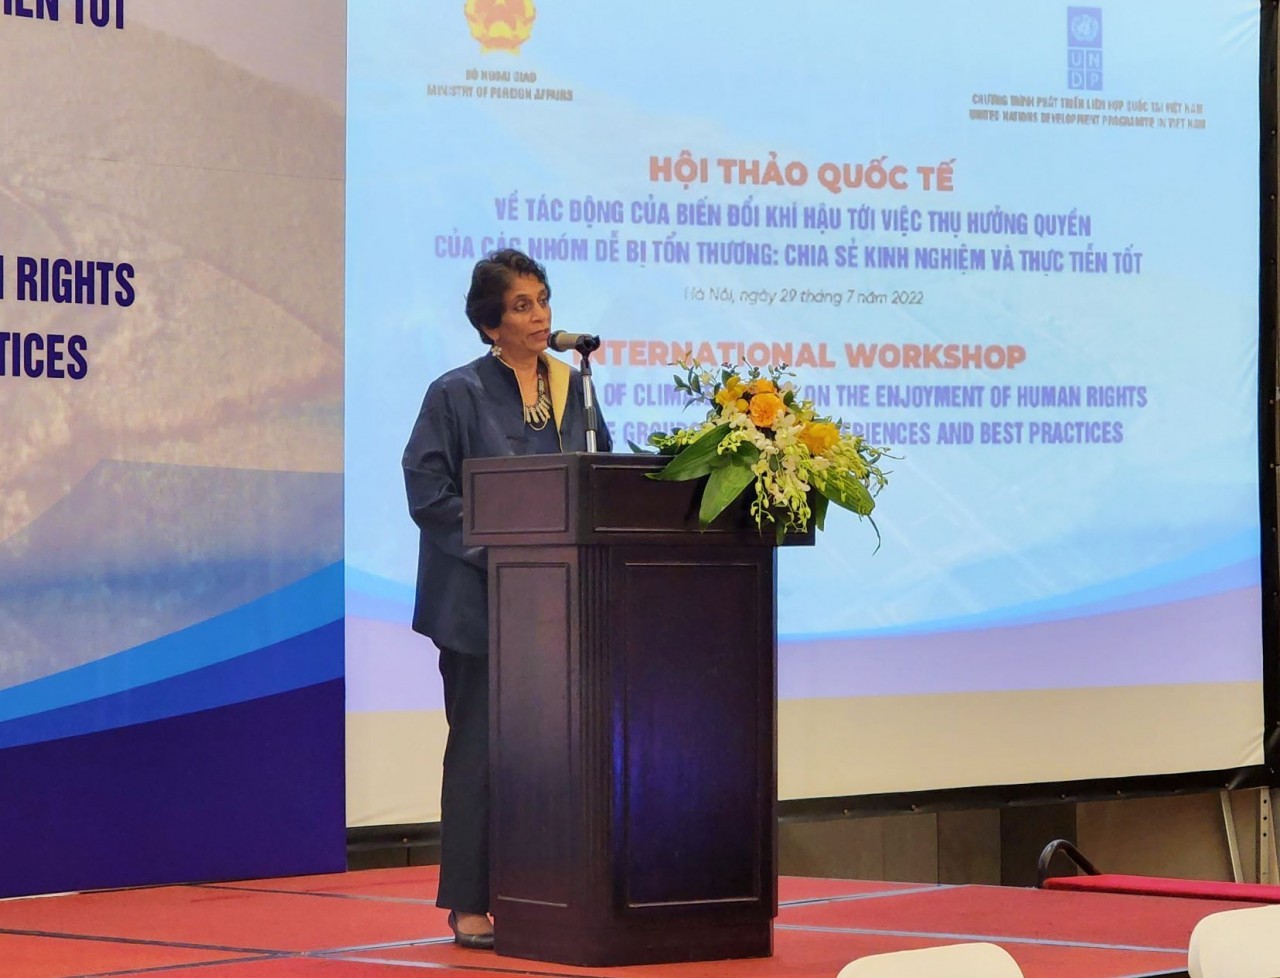 Kanni Wignaraja, UN Assistant Secretary-General and UNDP Regional Director for Asia and the Pacific. Source: VNT